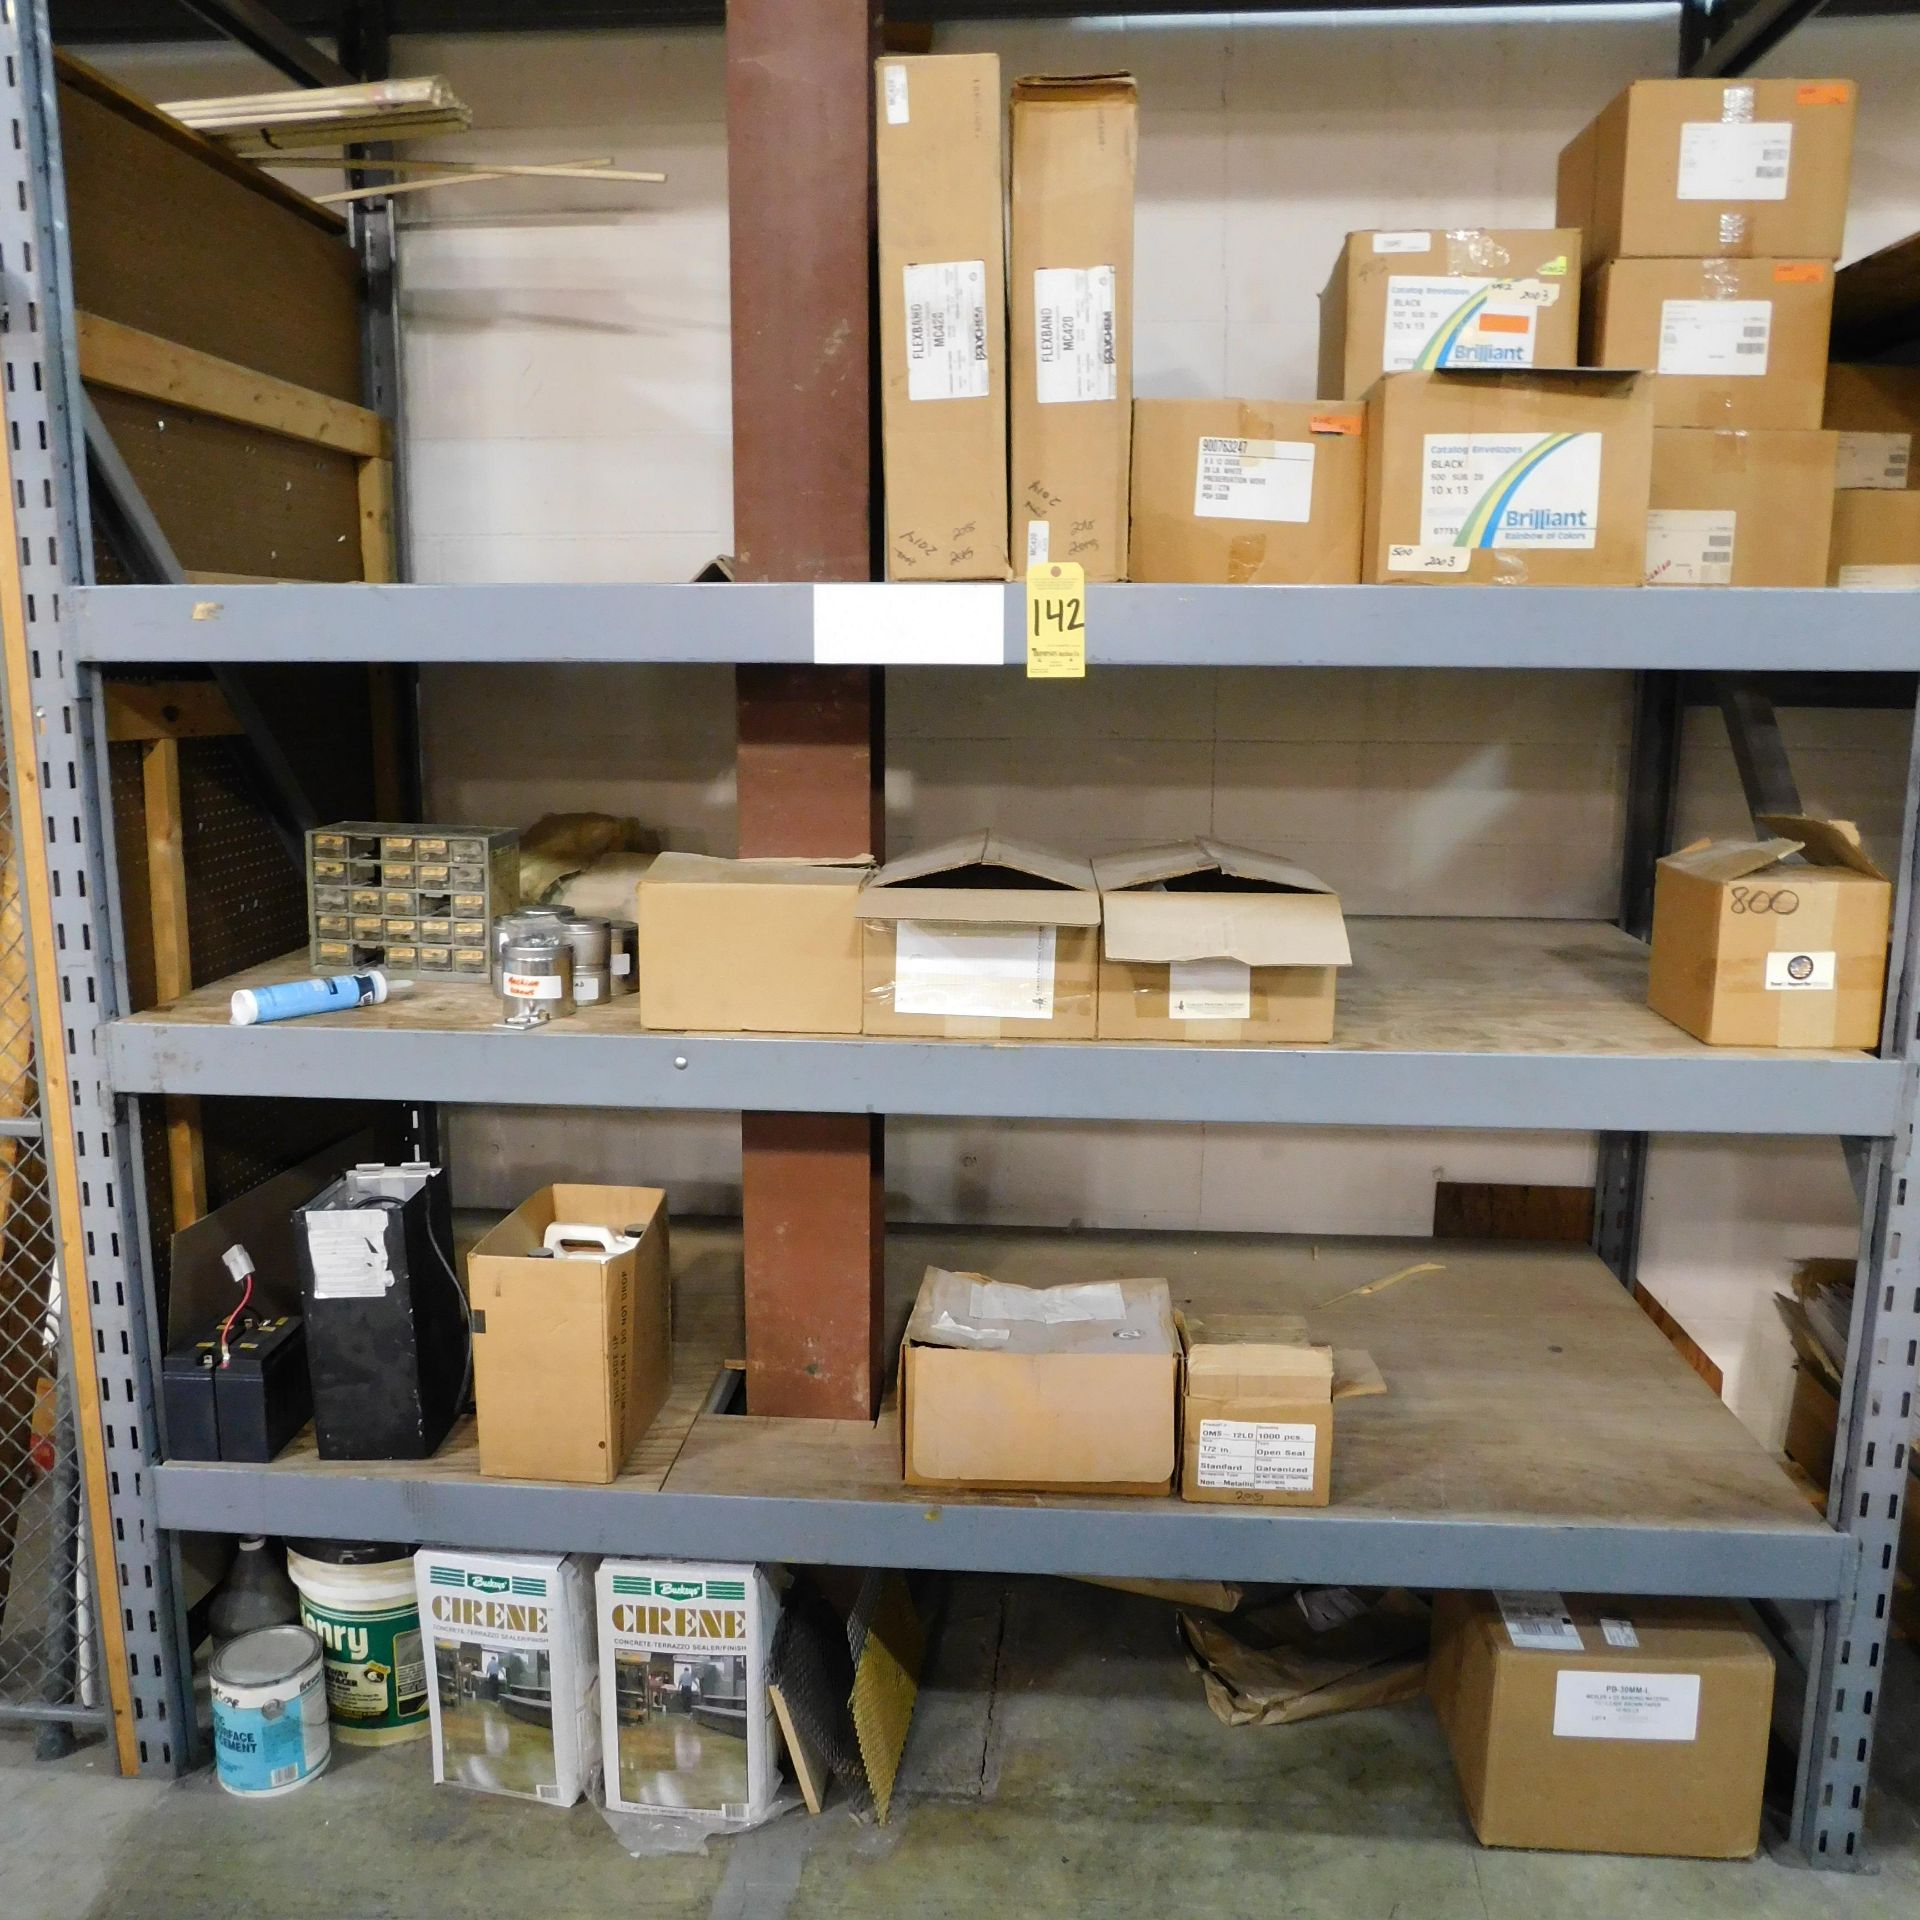 Paper Contents of (1) Section of pallet Shelving